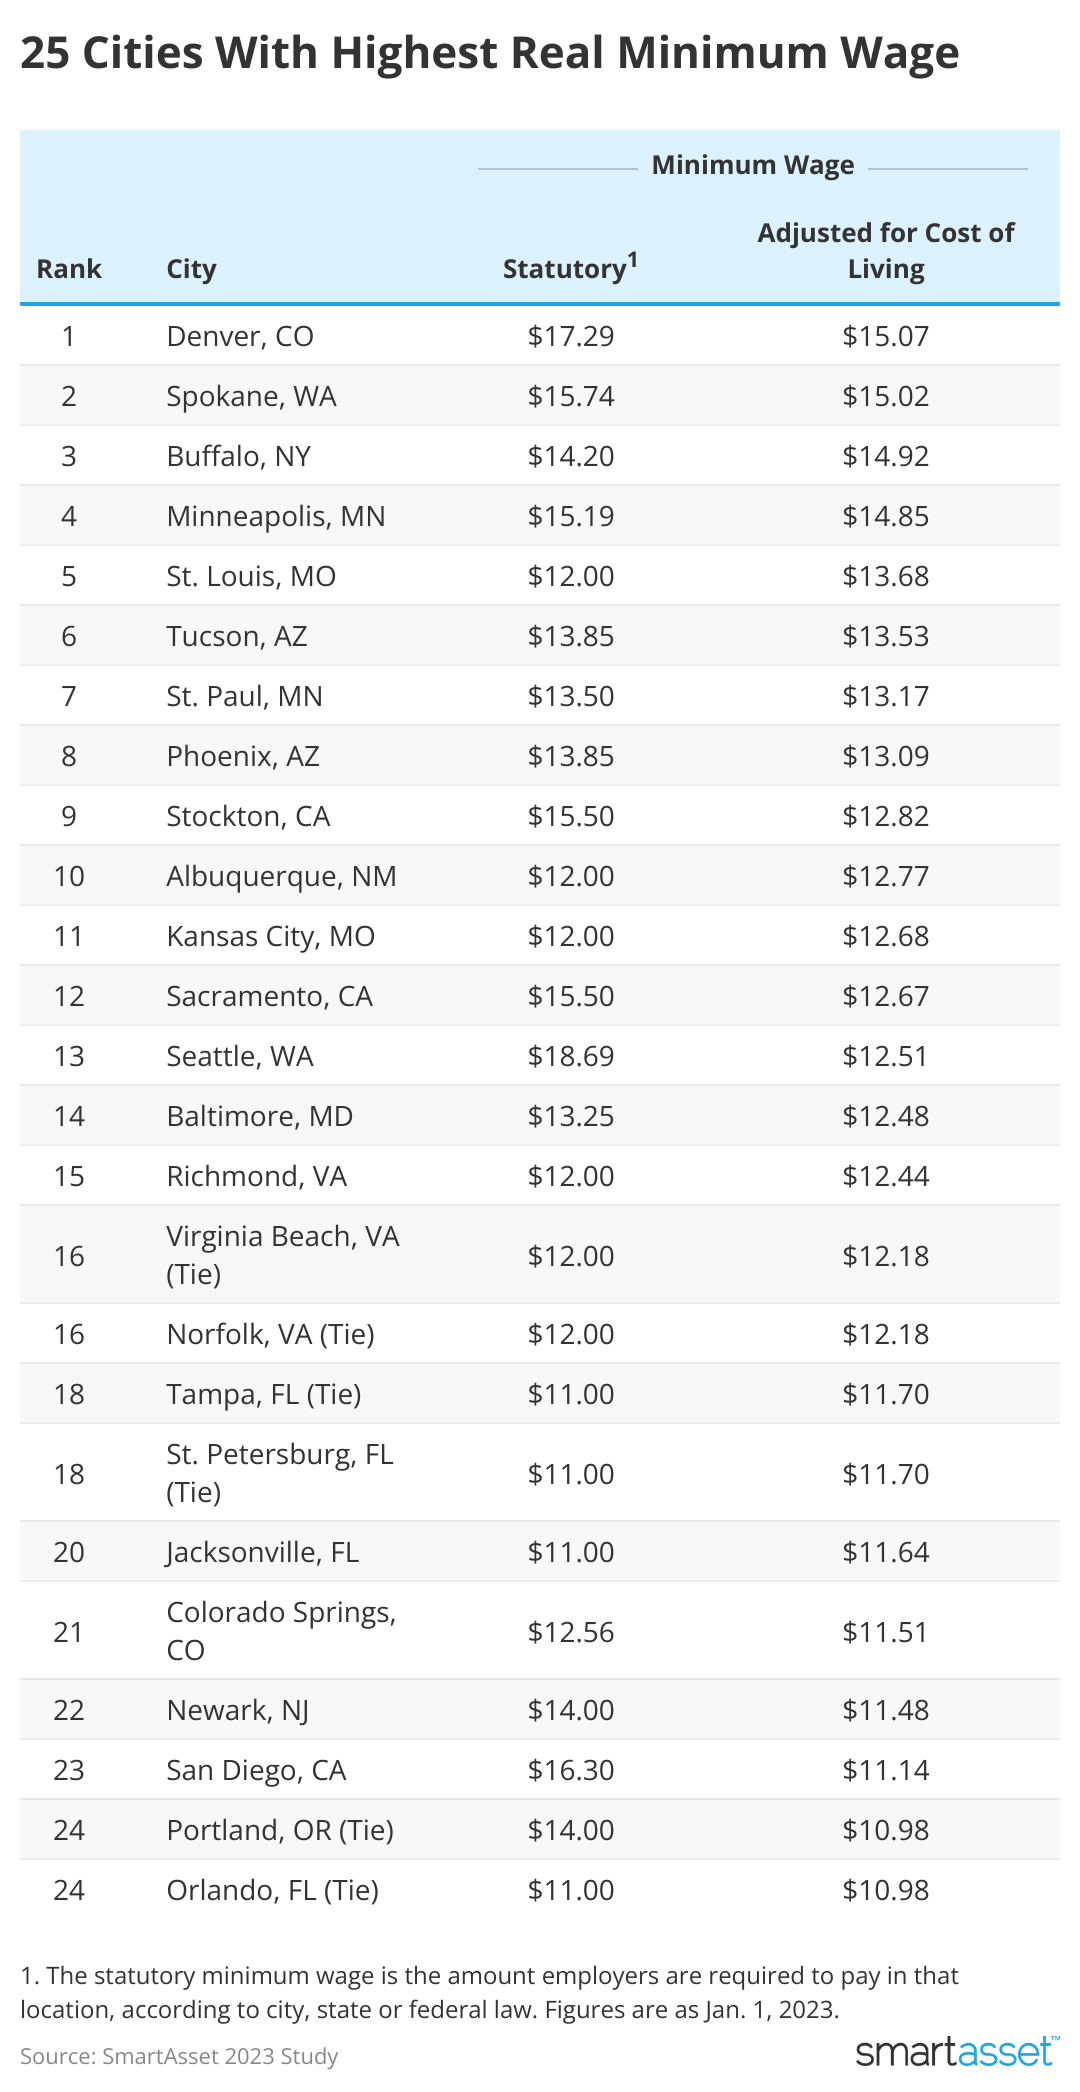 A chart listing the 25 cities with the highest real minimum wage.